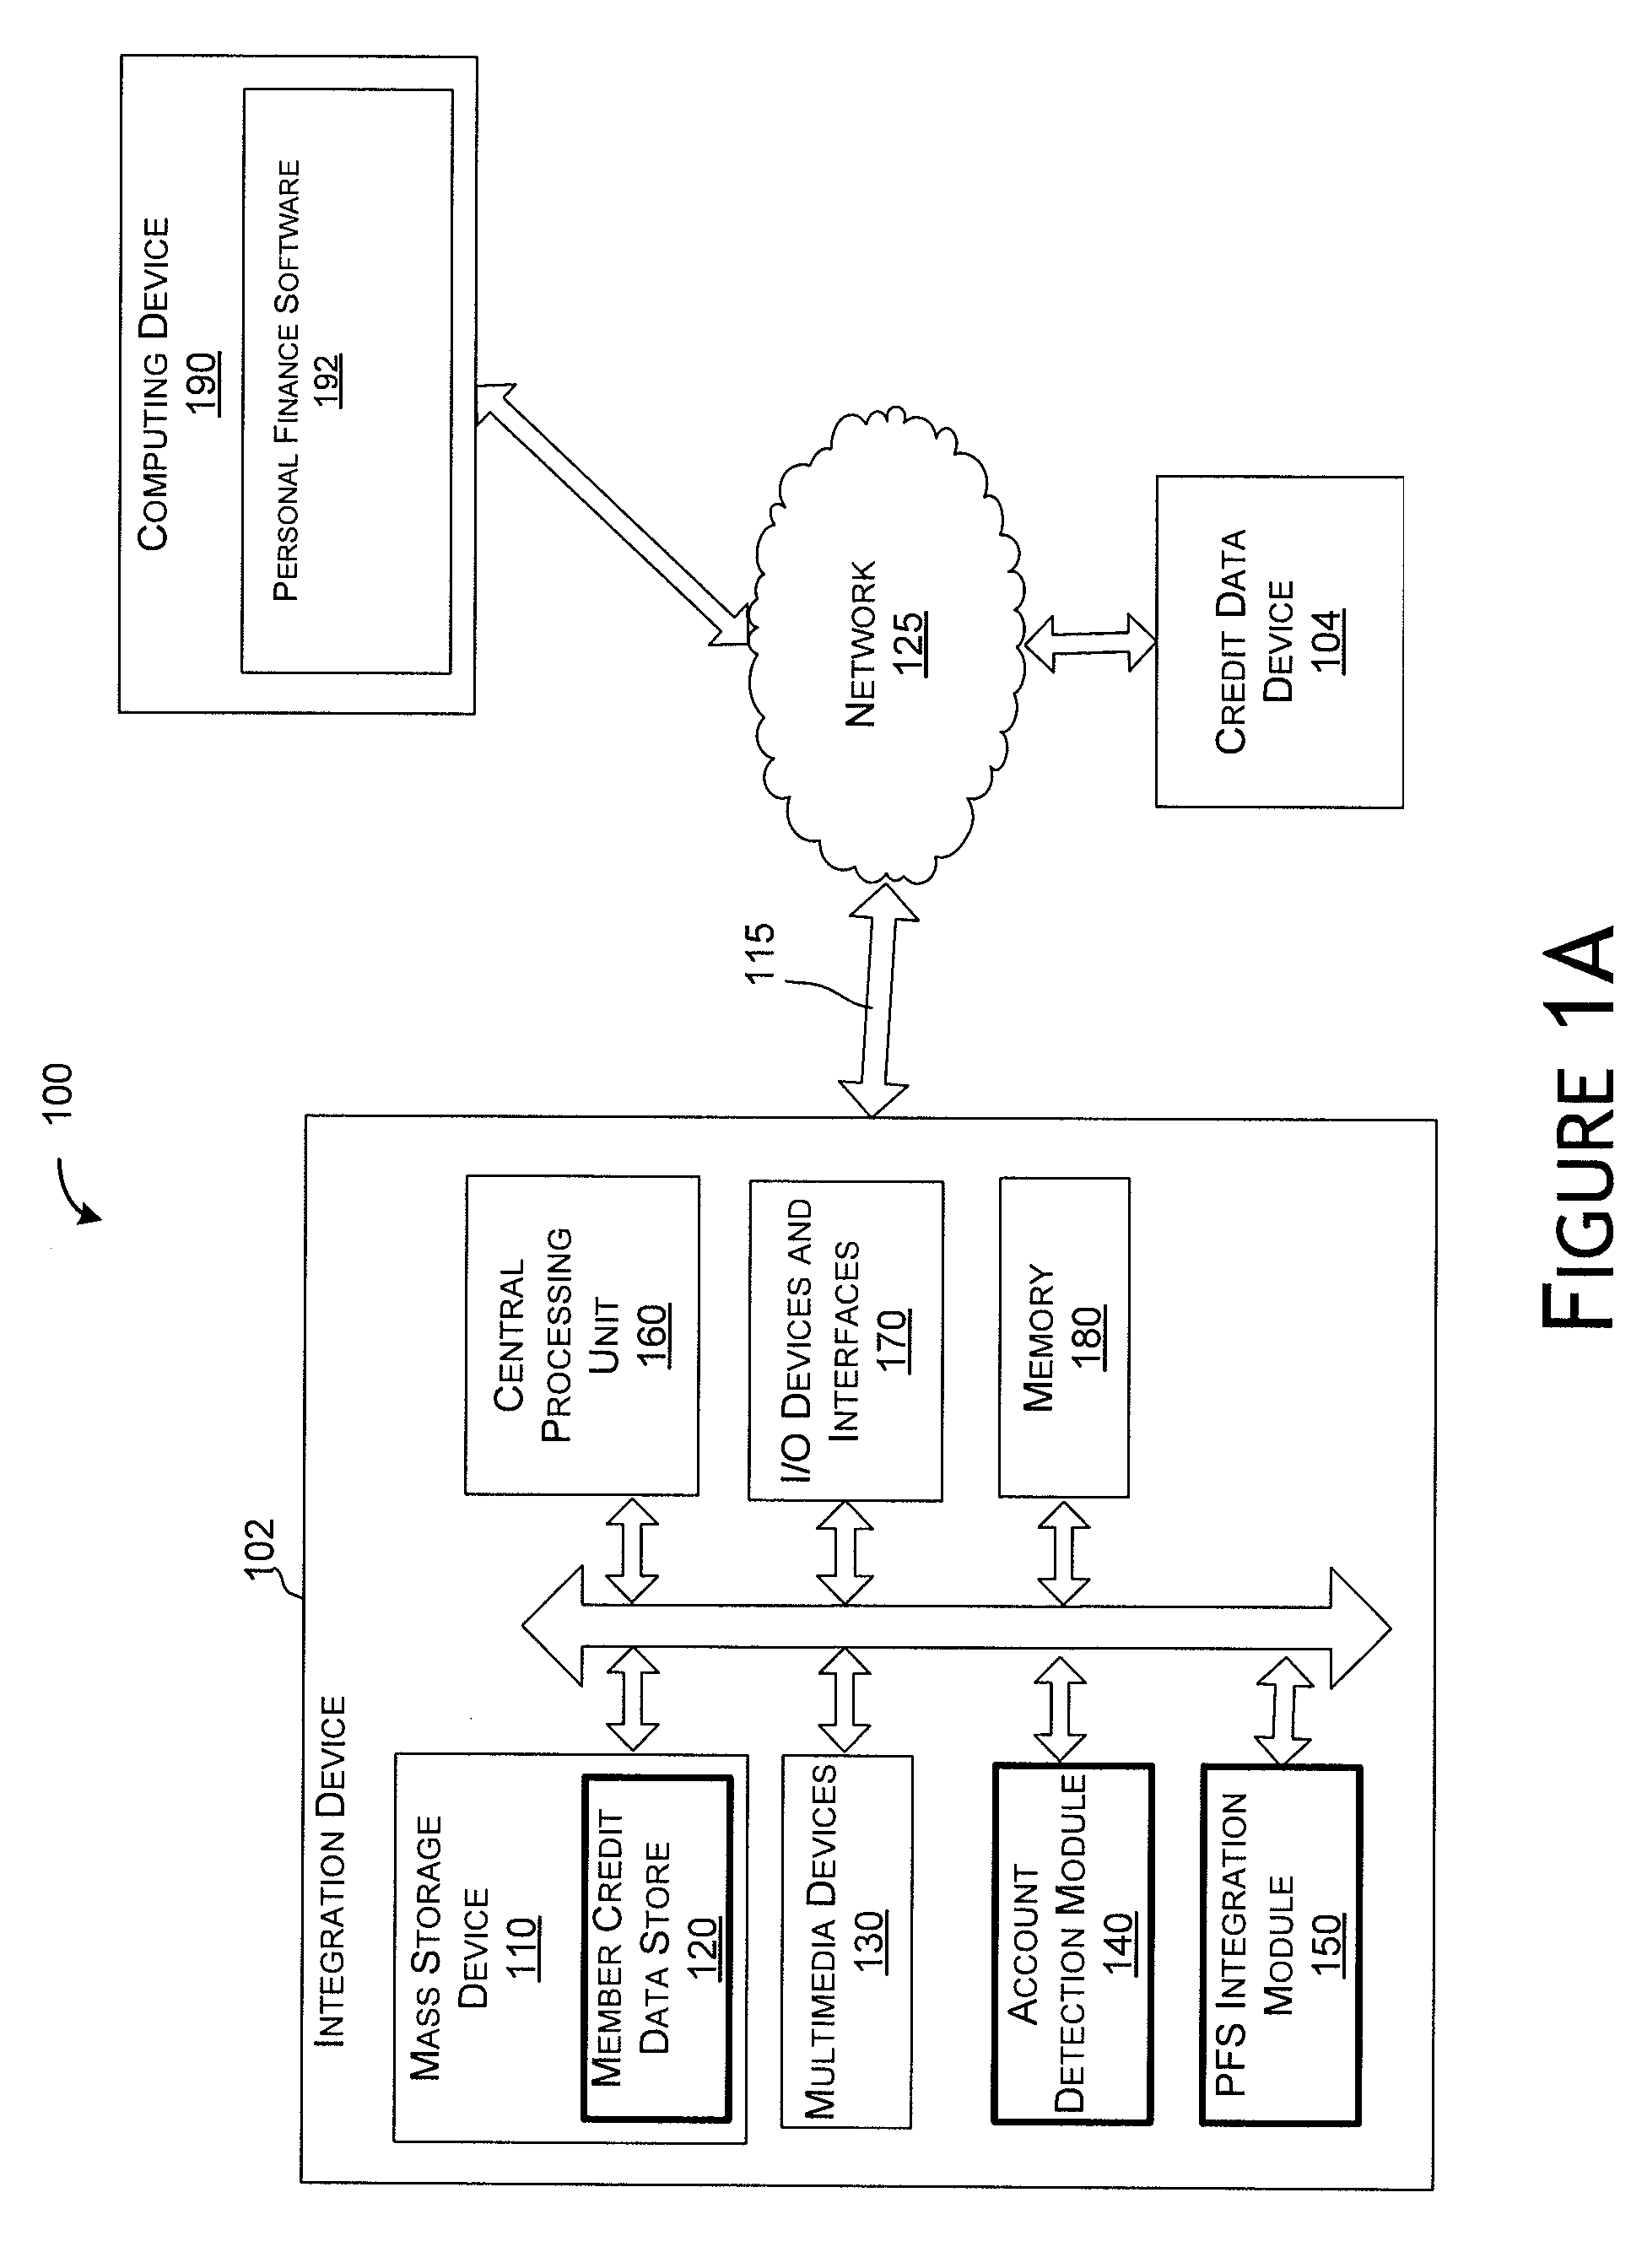 Personal finance integration system and method